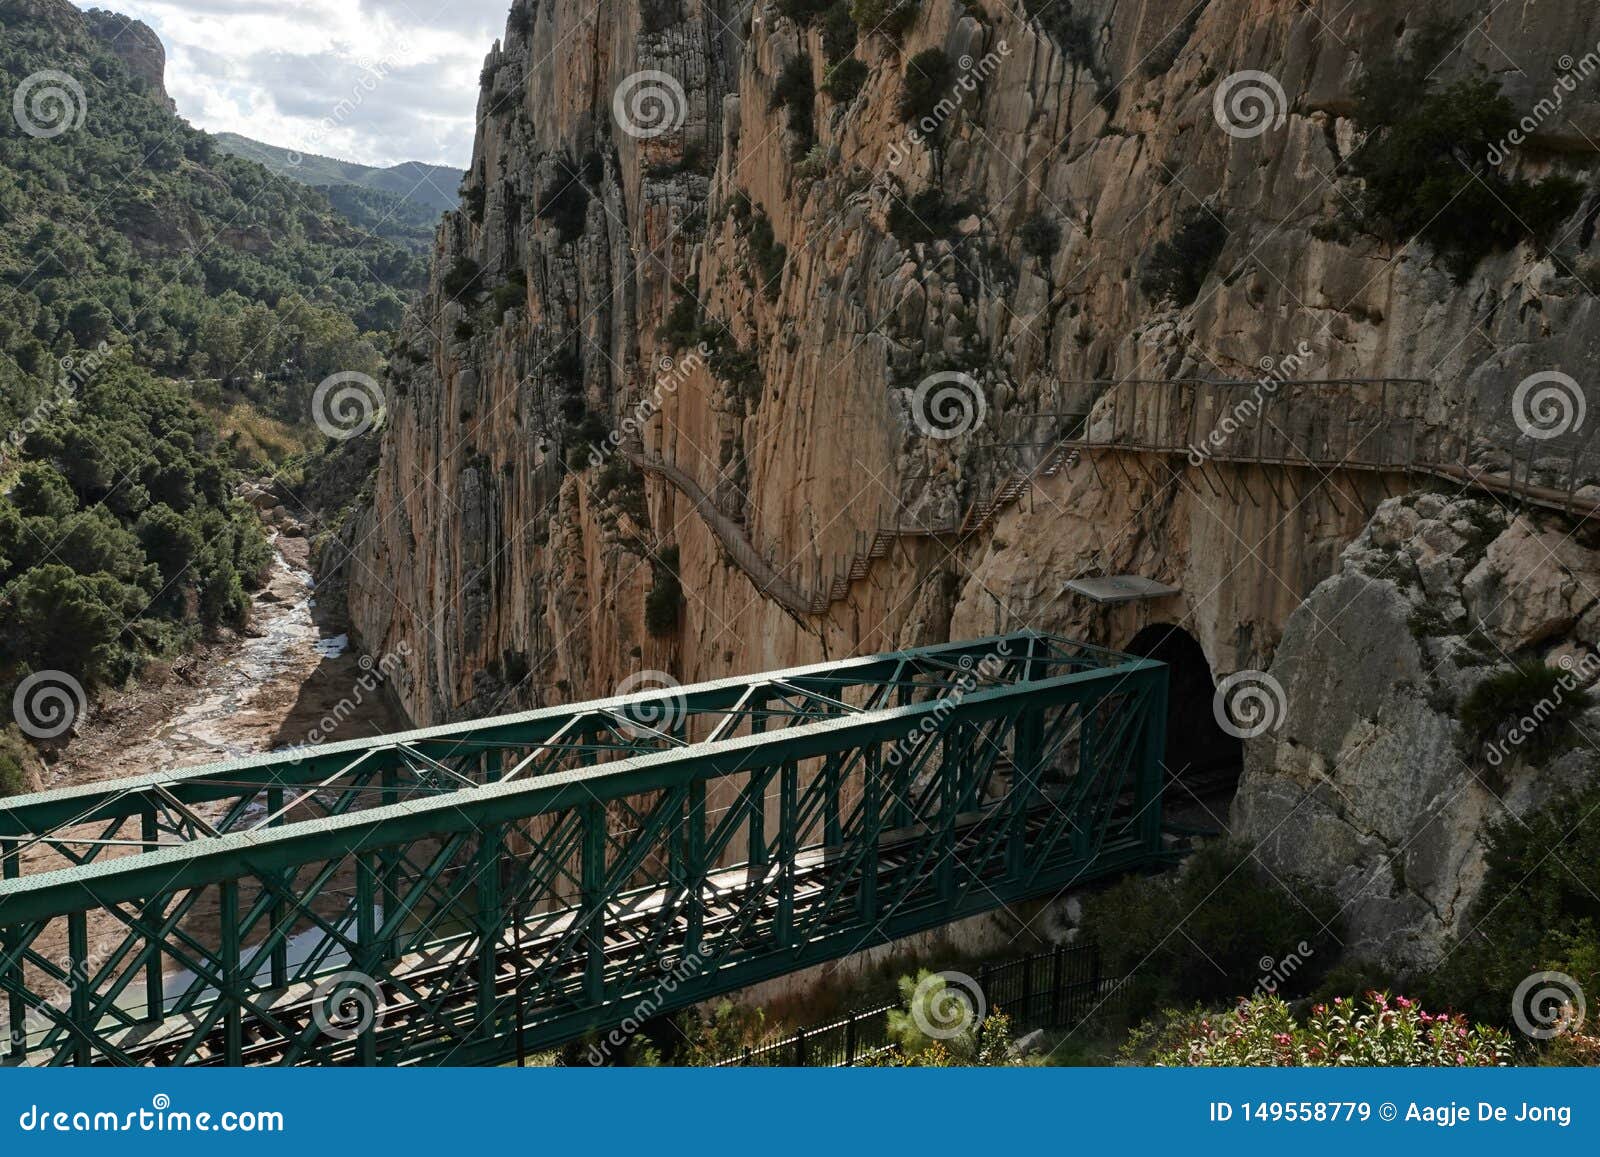 gaitanes wall of caminito del rey in andalusia, spain